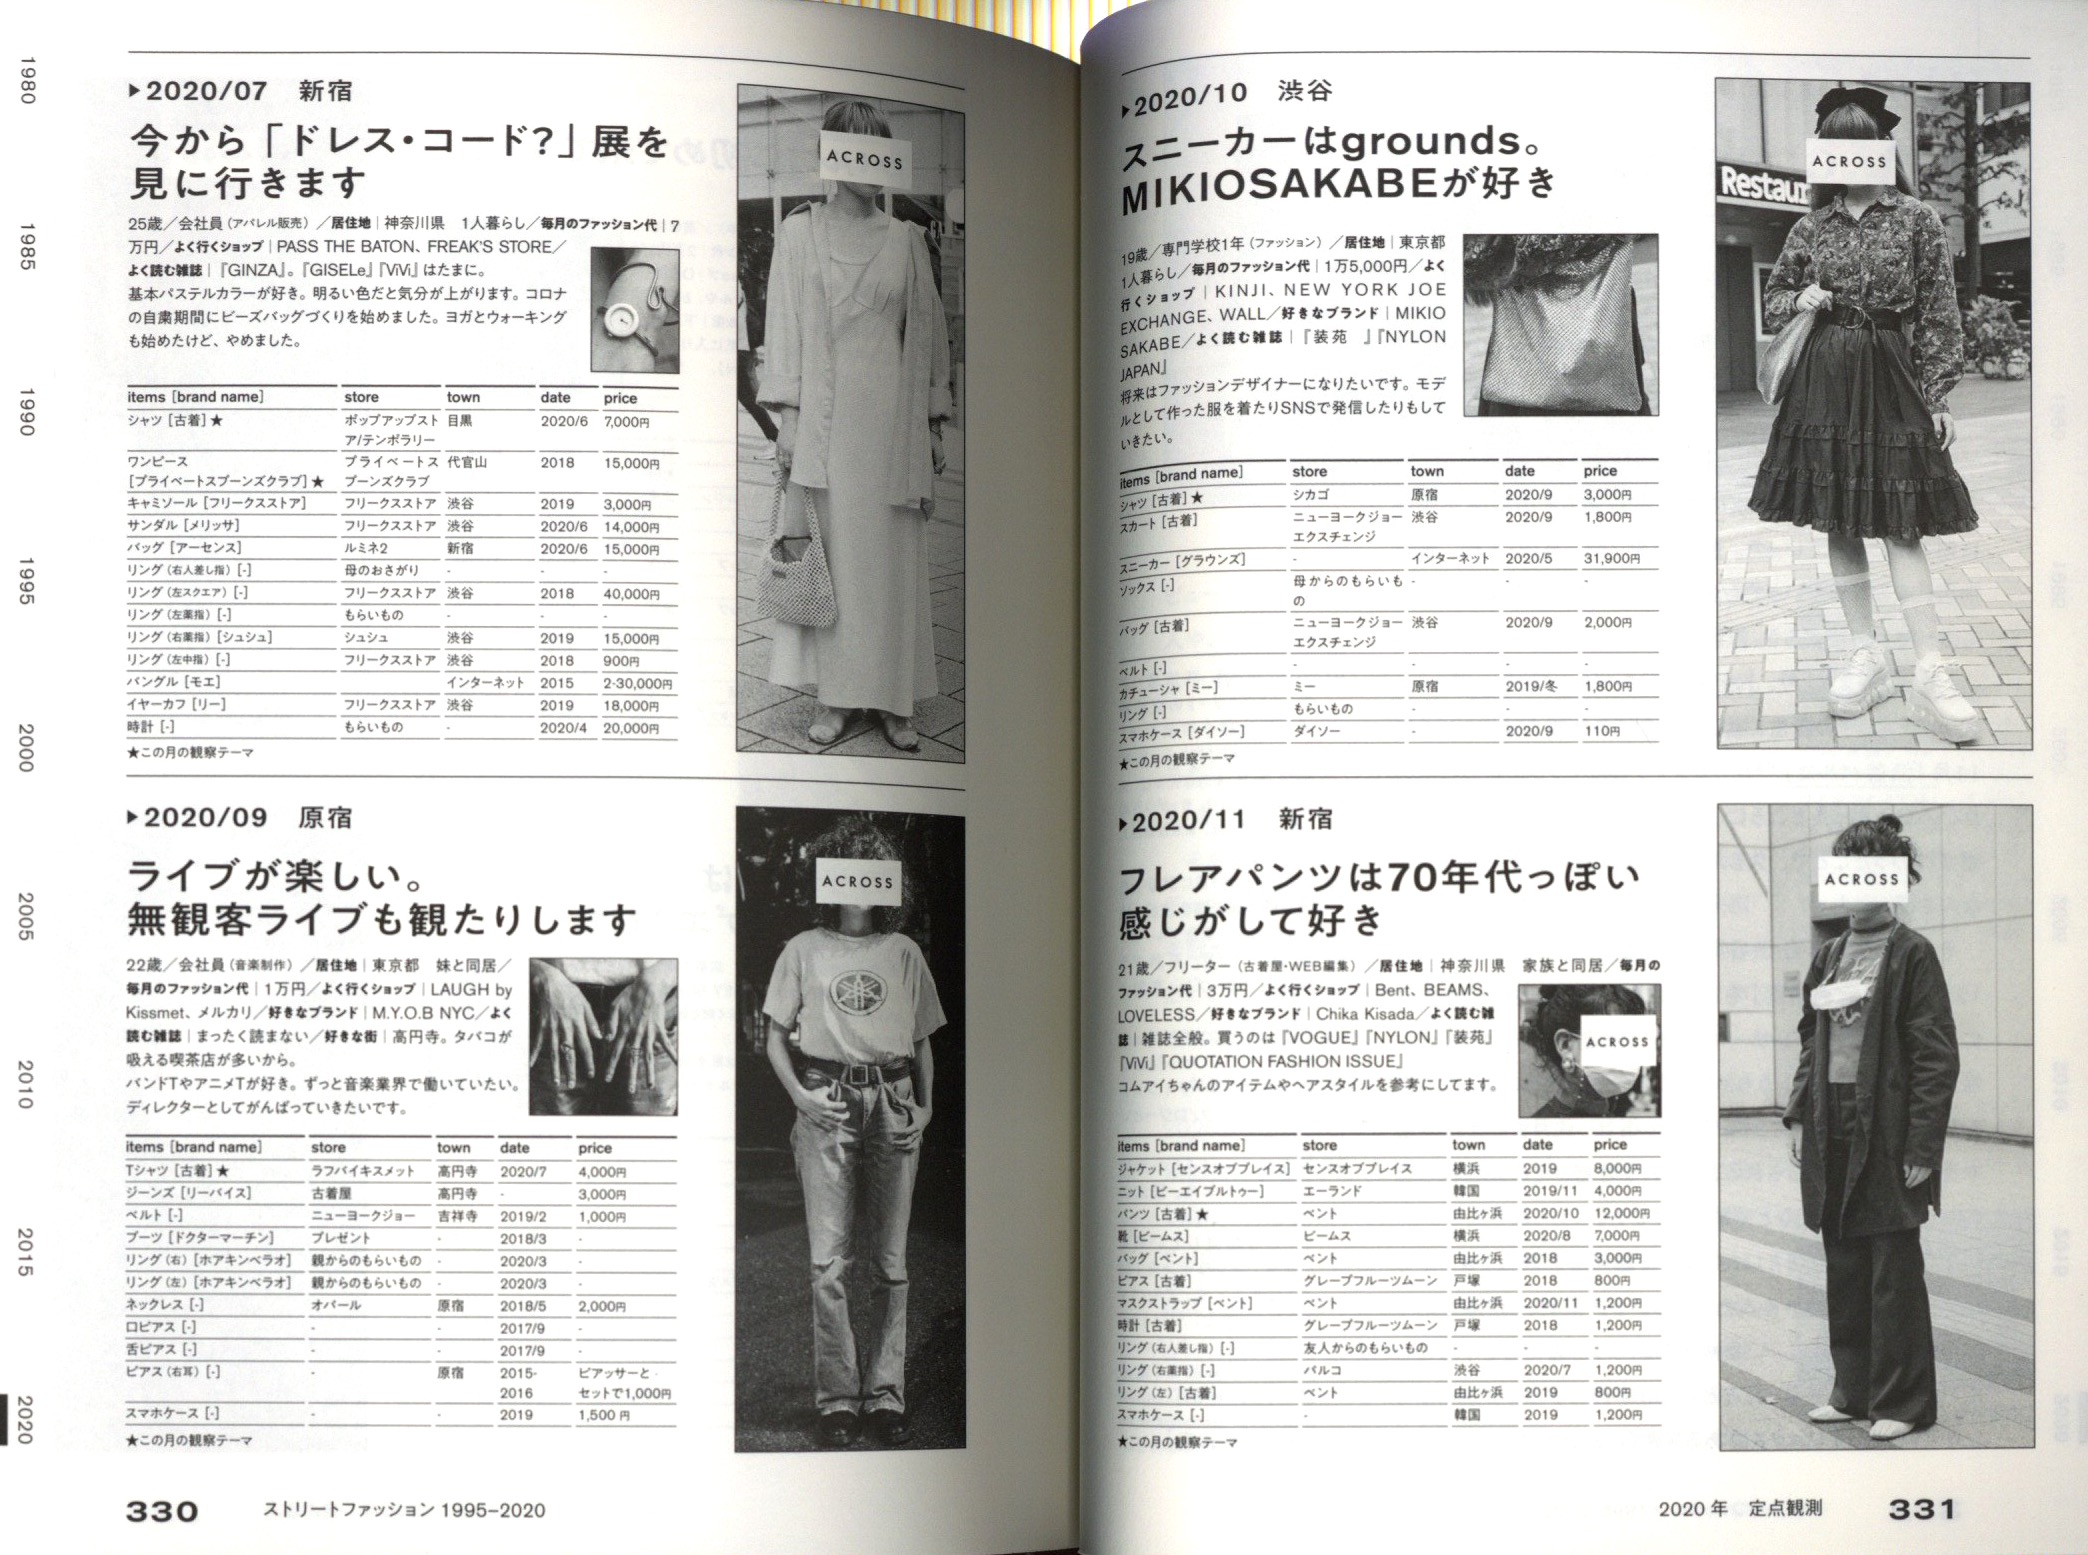 Street Fashion in Japan 1980-2020 -Fixed Point Observation Record